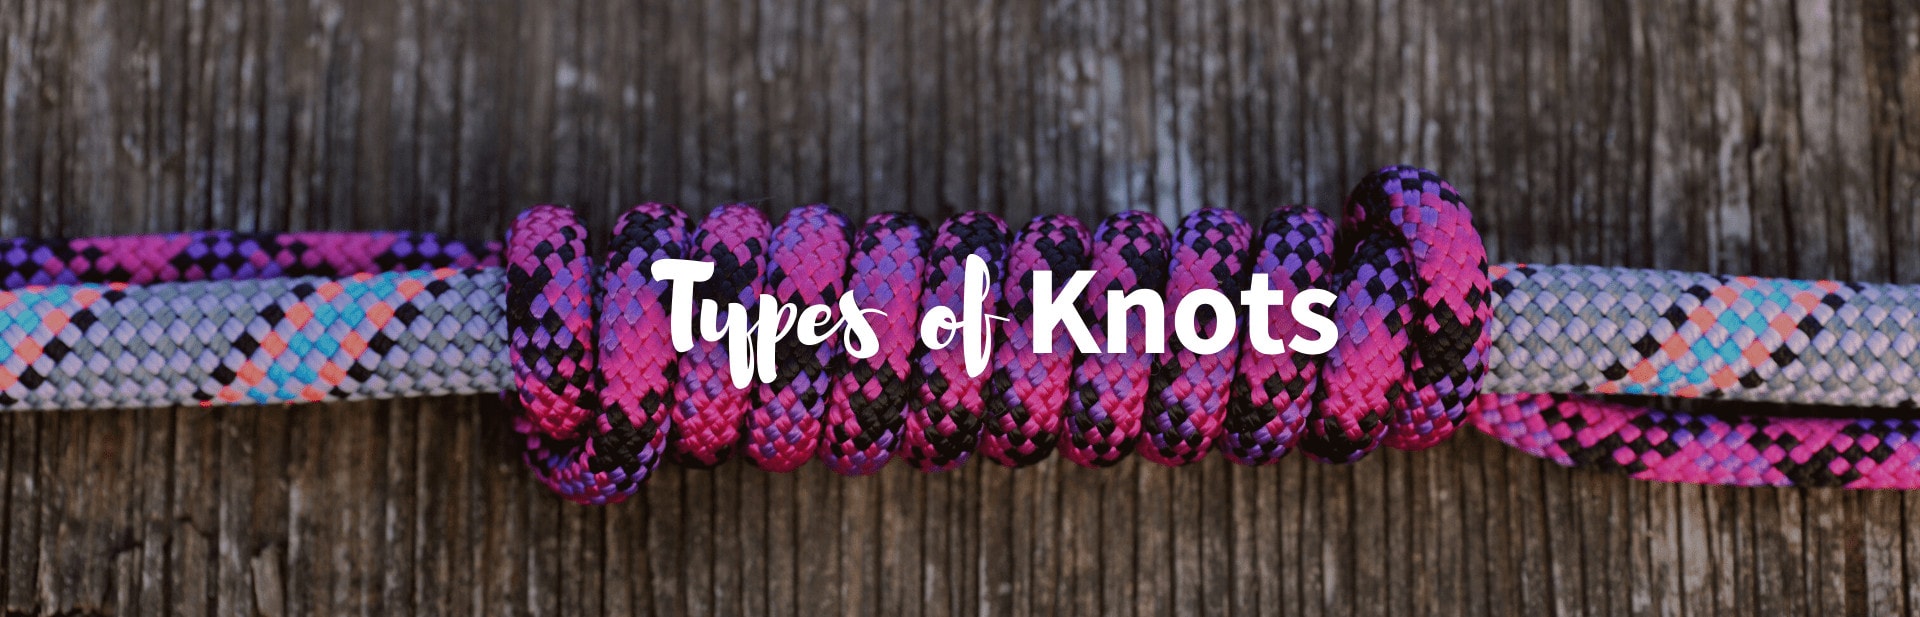 25 Types of Knots: Essential Skills for Any Adventure